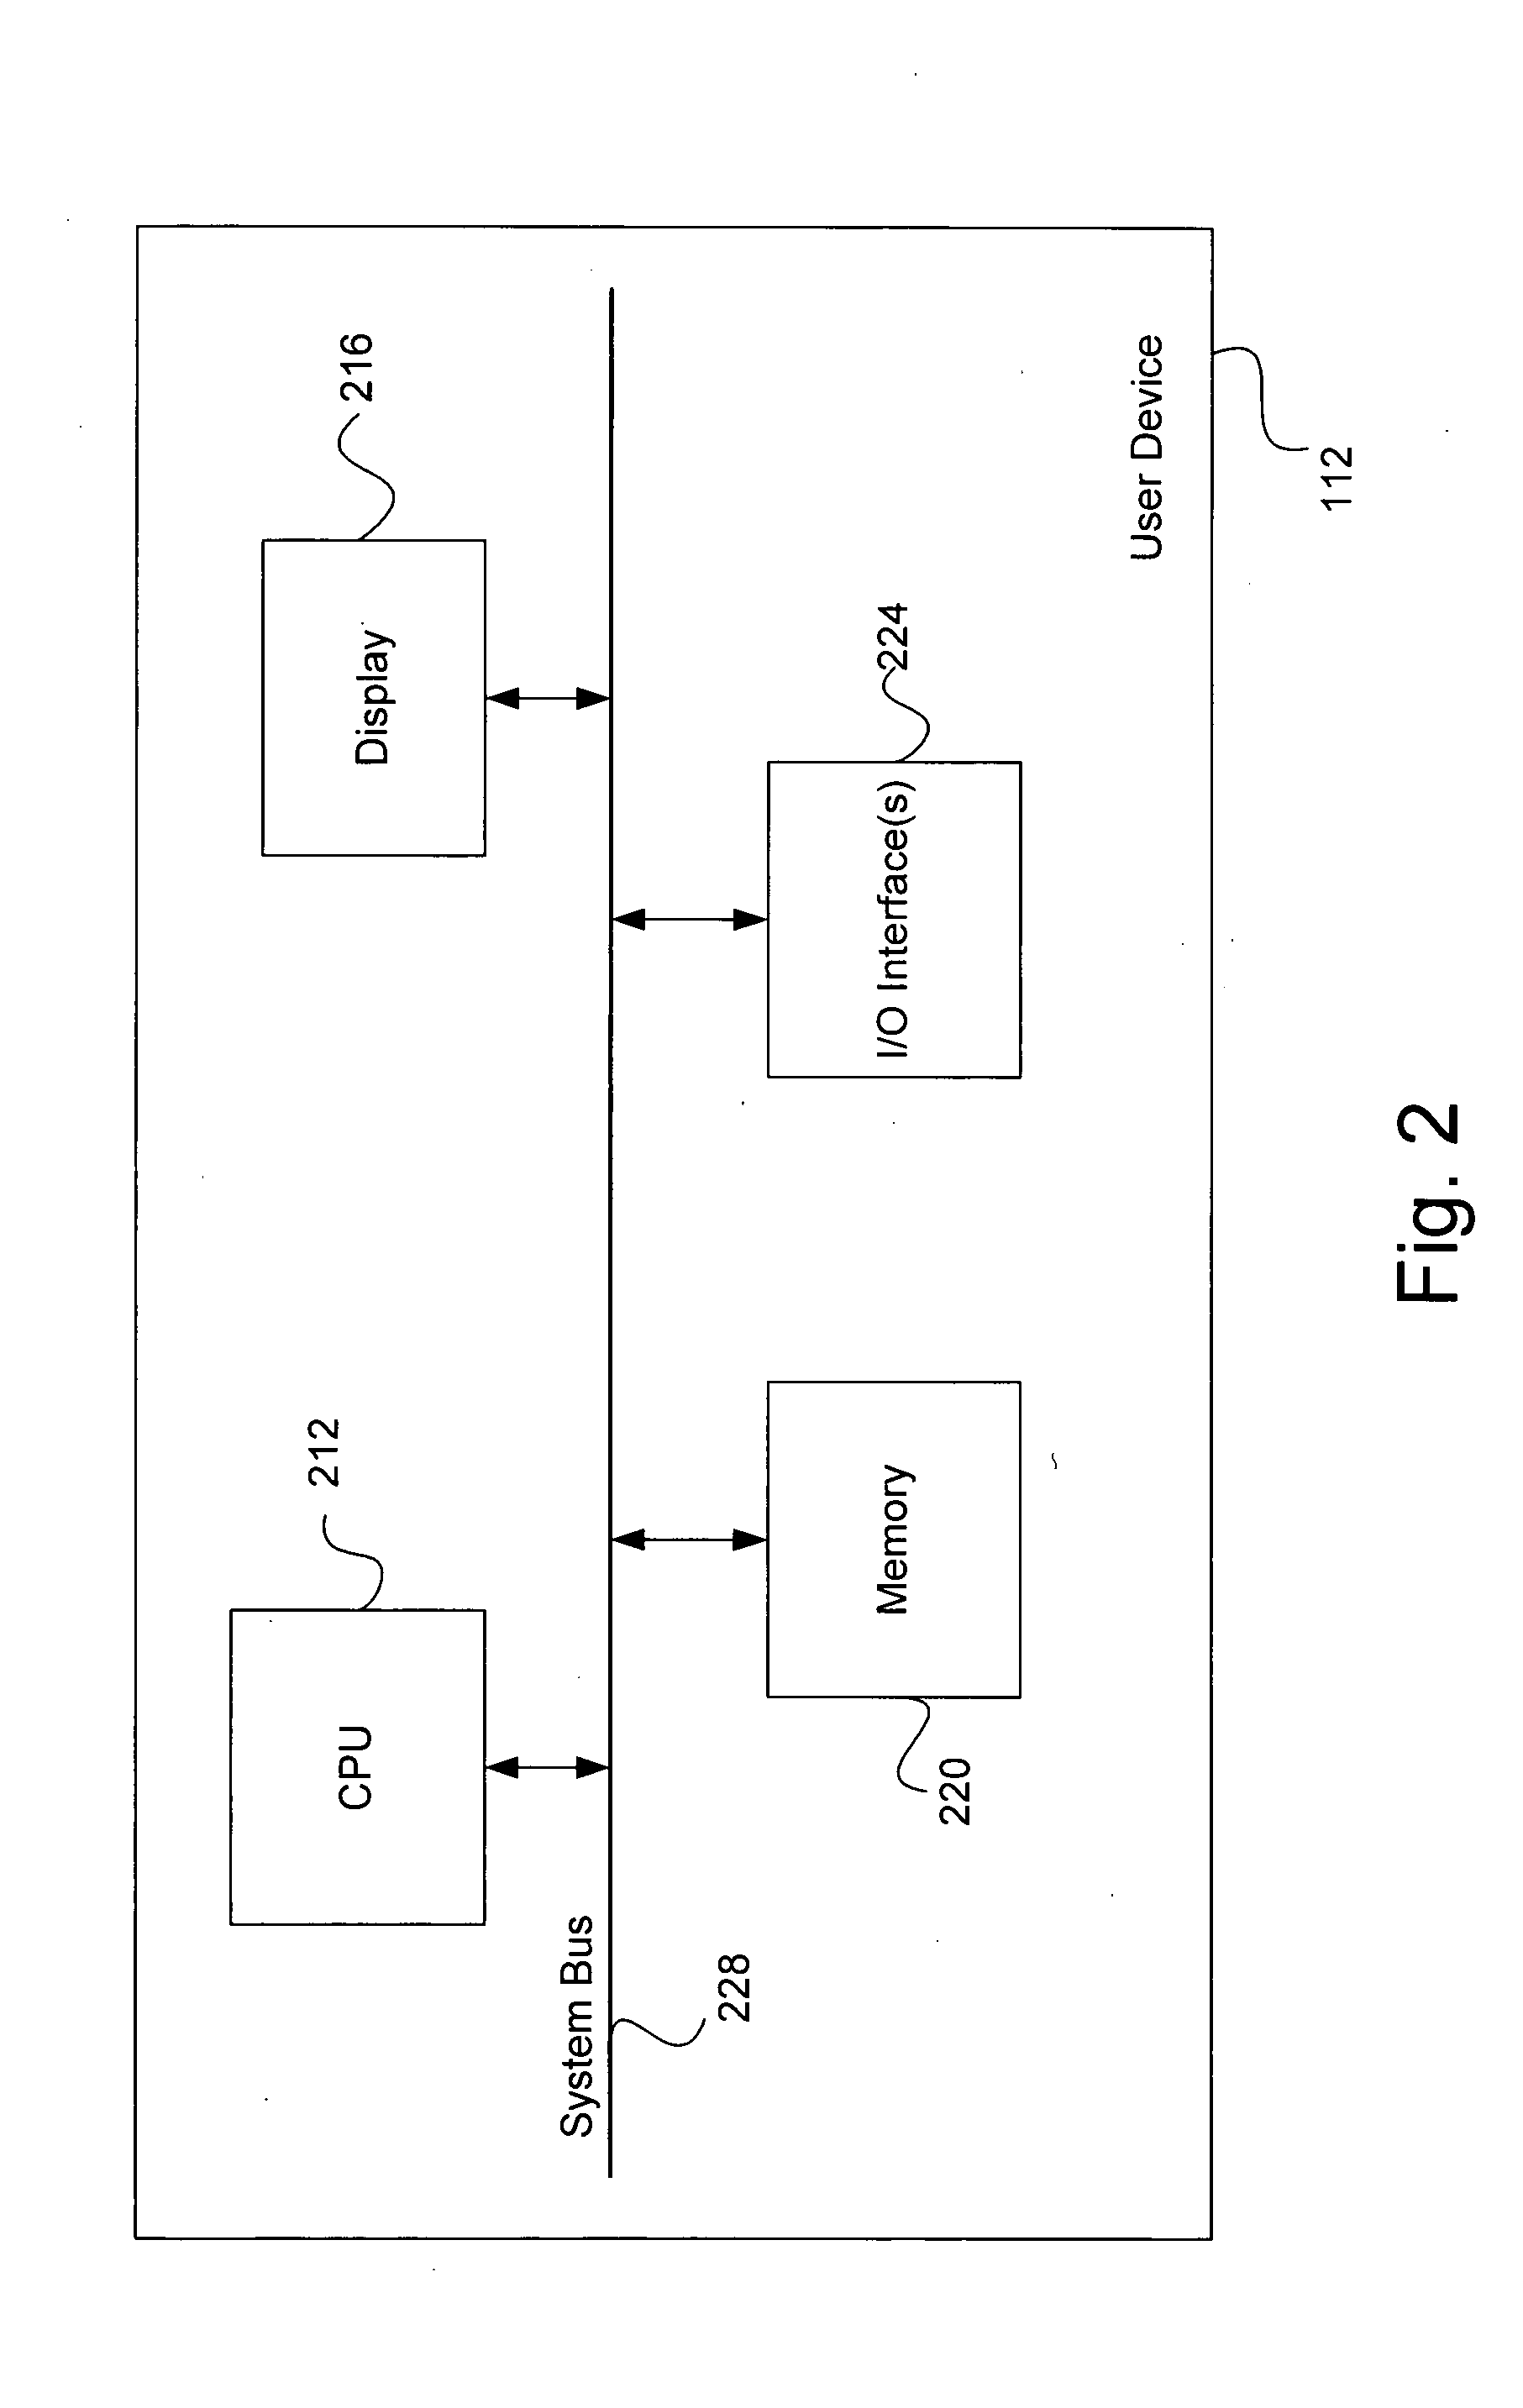 System and method for effectively implementing a dynamic user interface in an electronic network